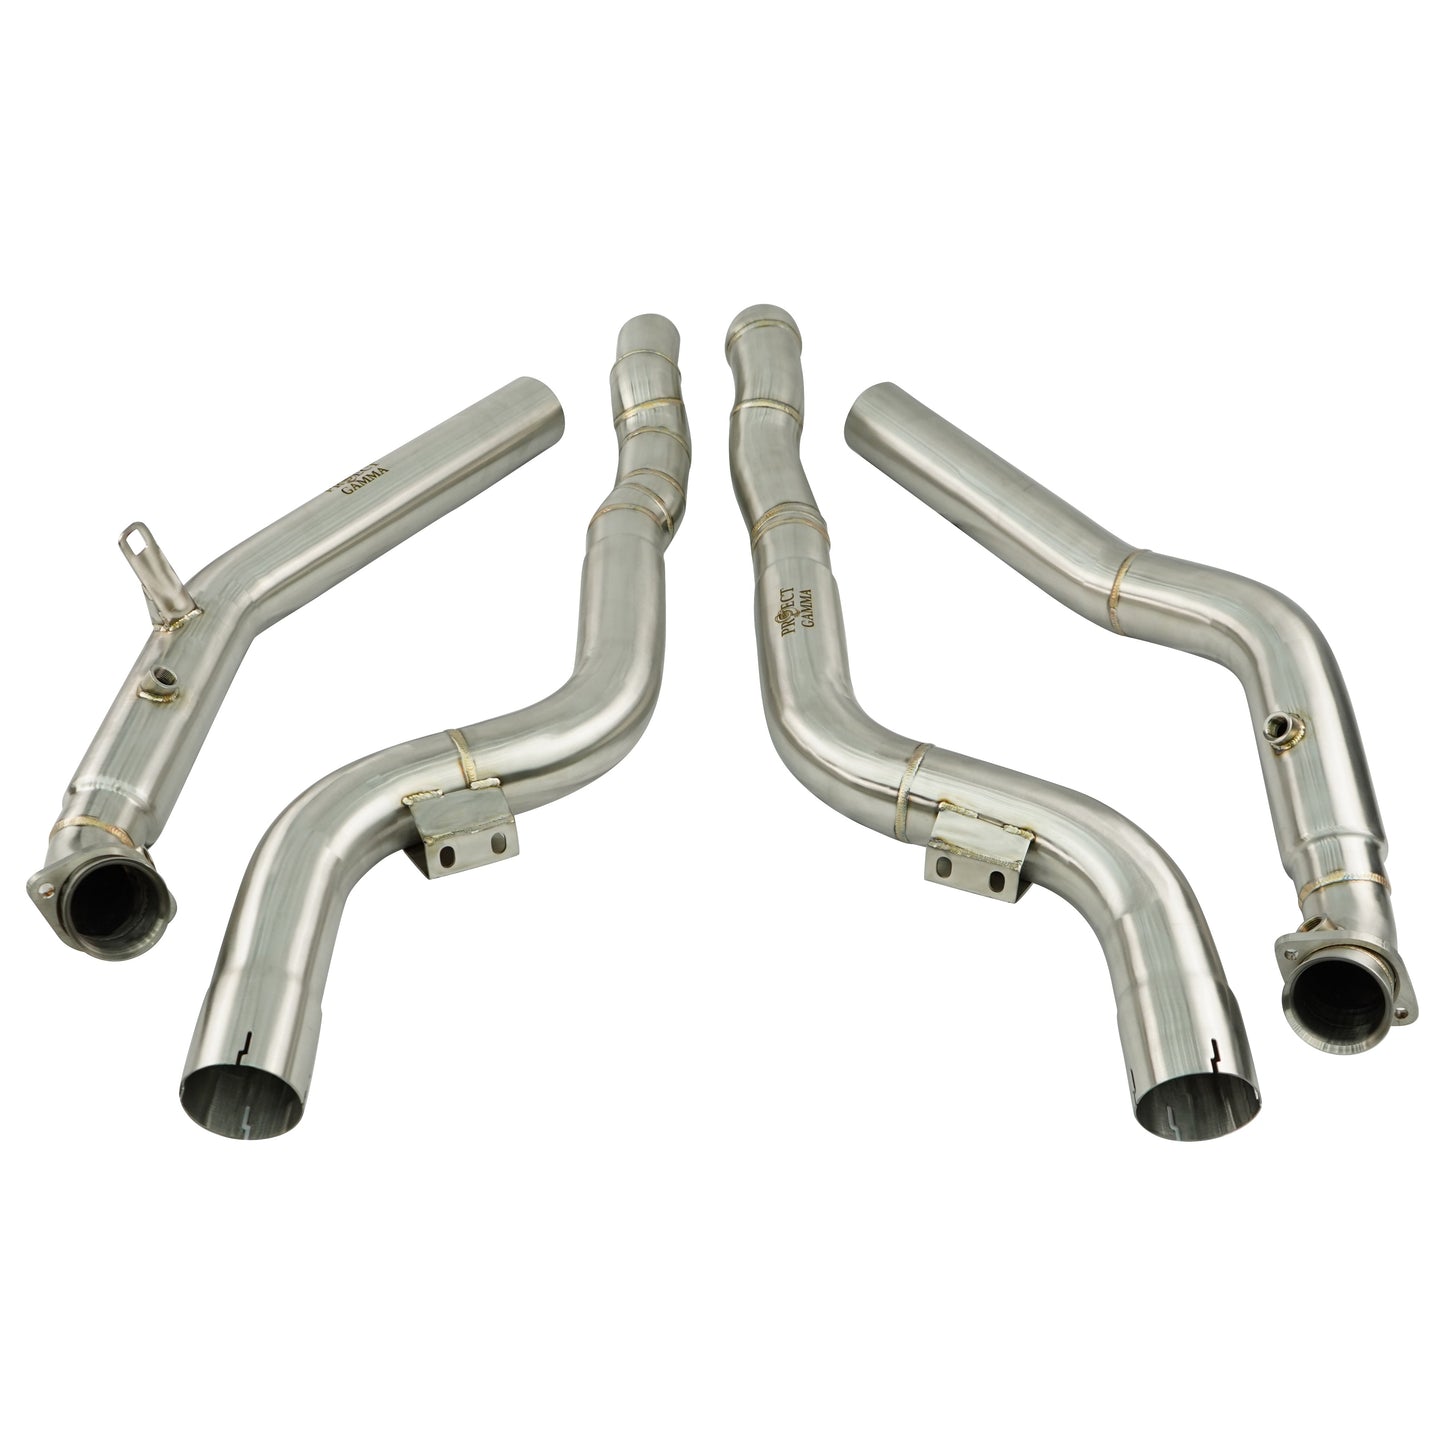 Project Gamma Mercedes CLS 63 AMG (C218) Stainless Steel Downpipes DP9898